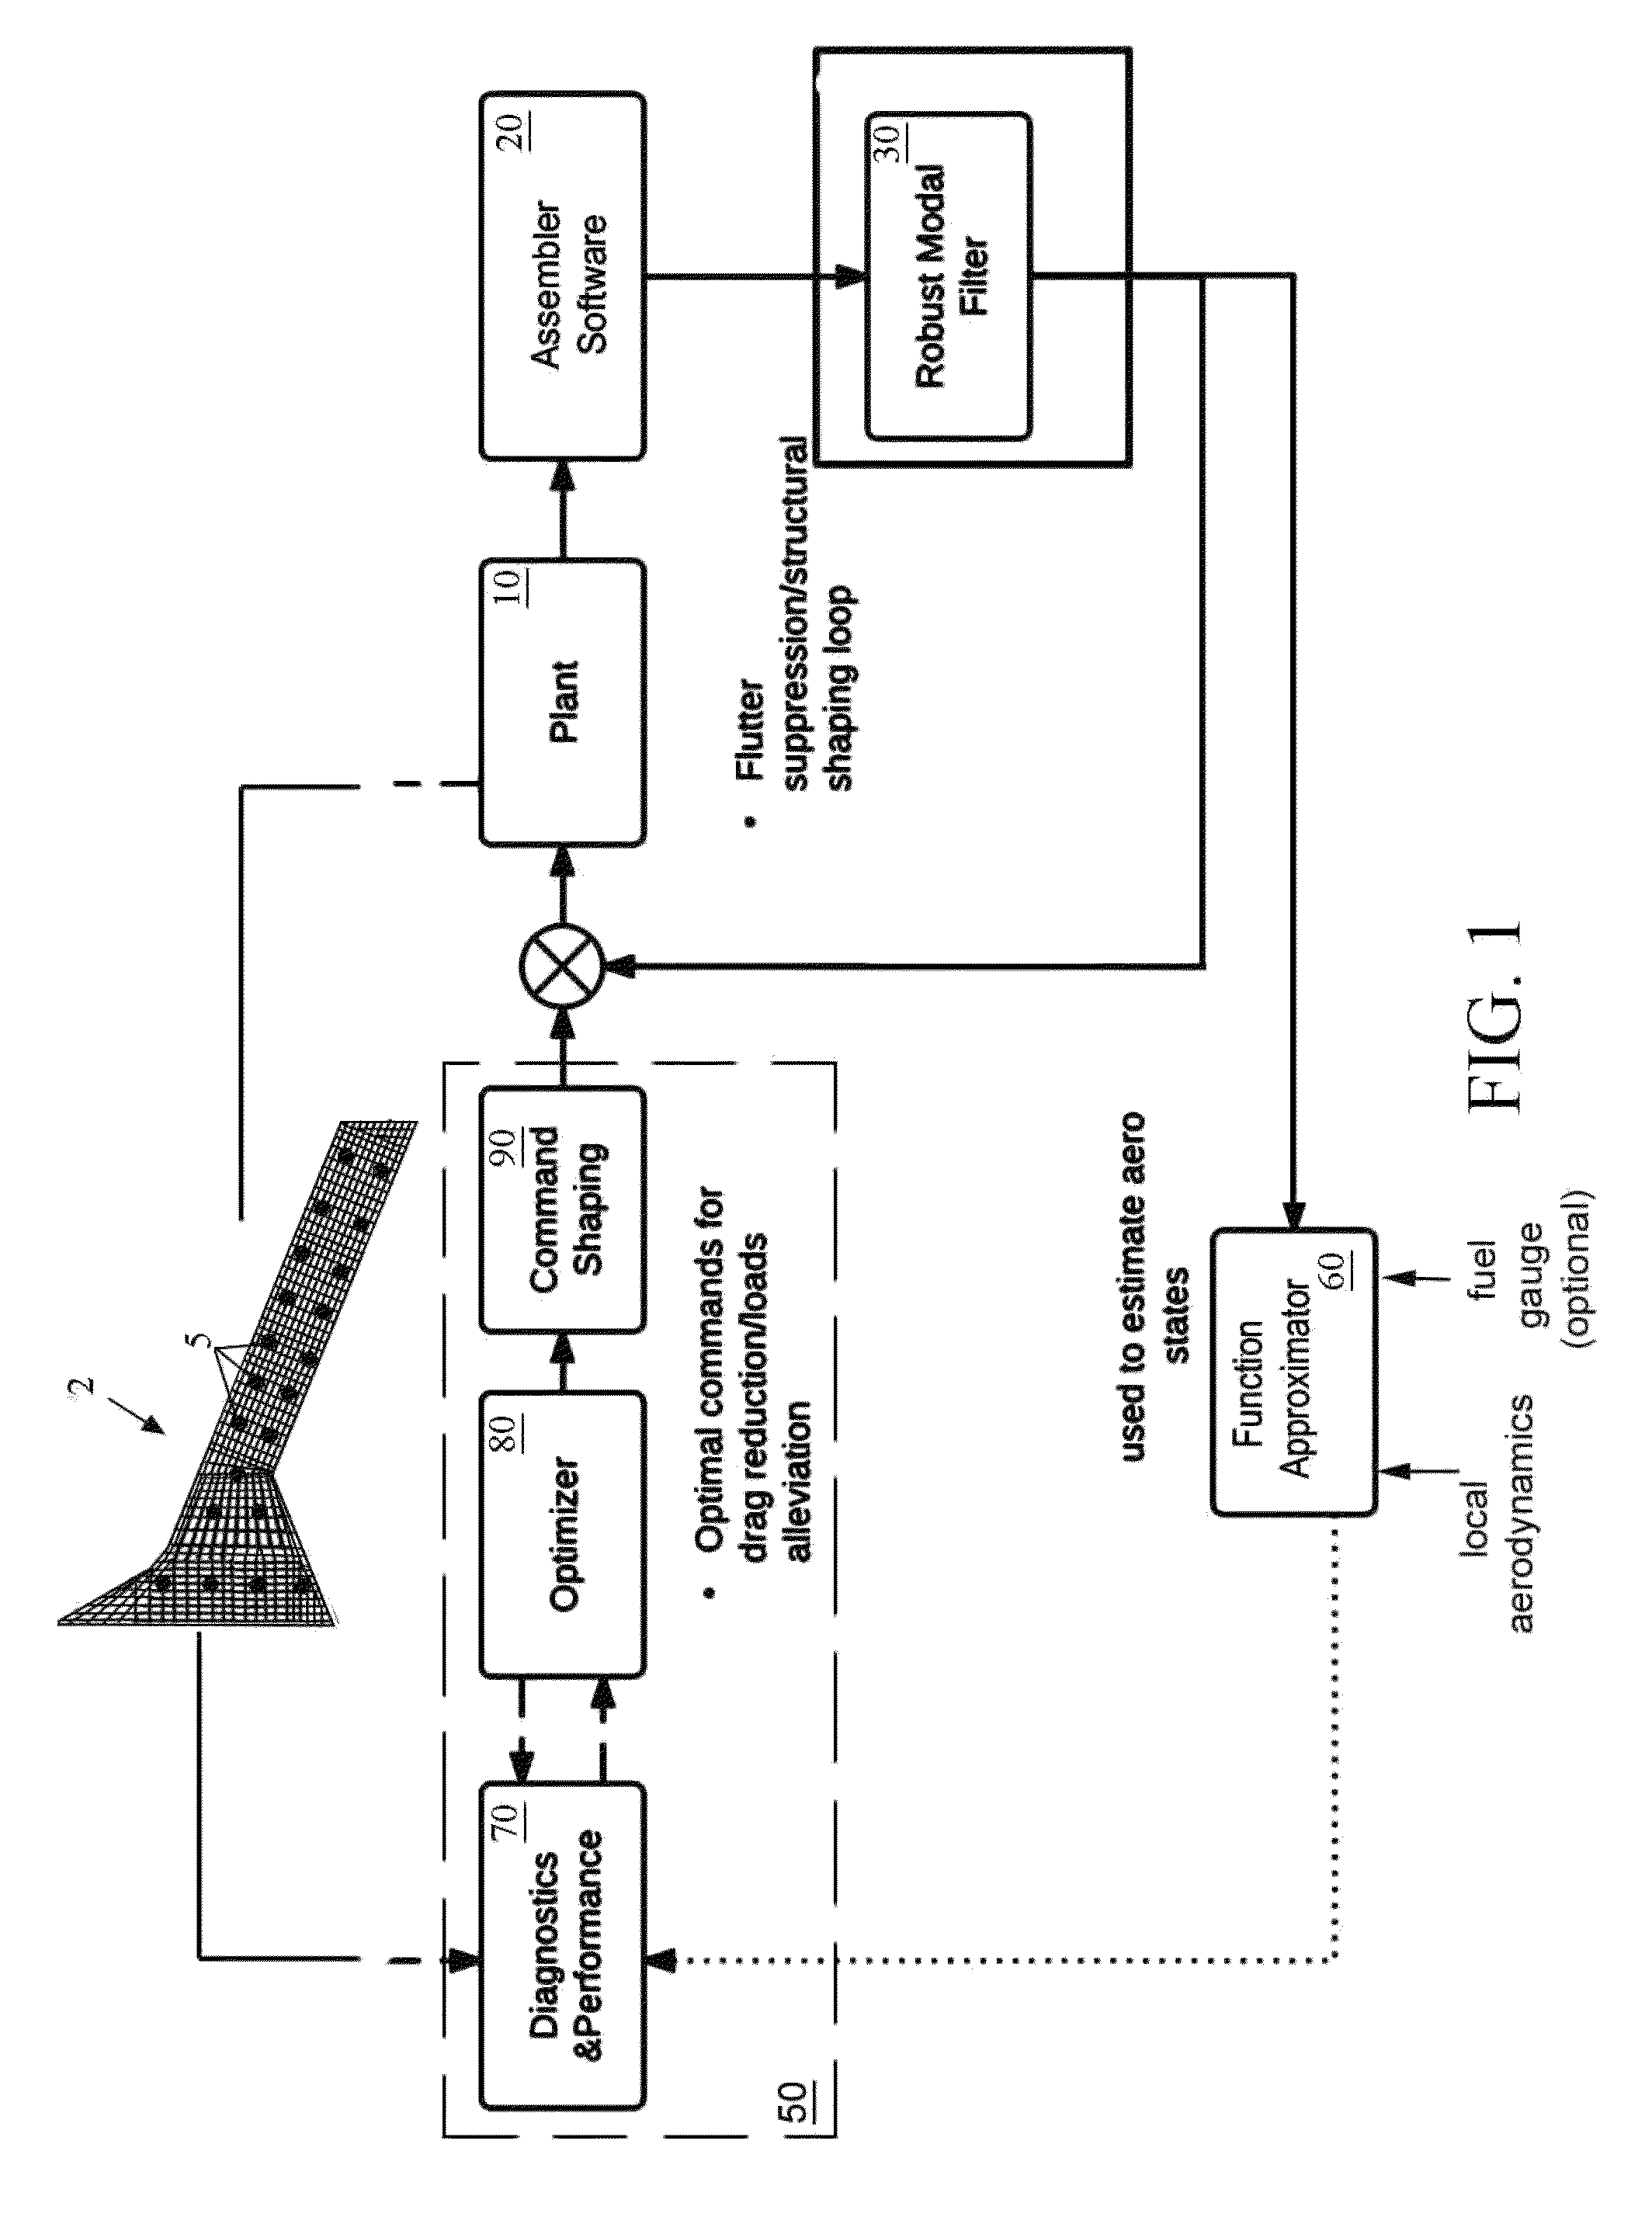 System and method for dynamic aeroelastic control